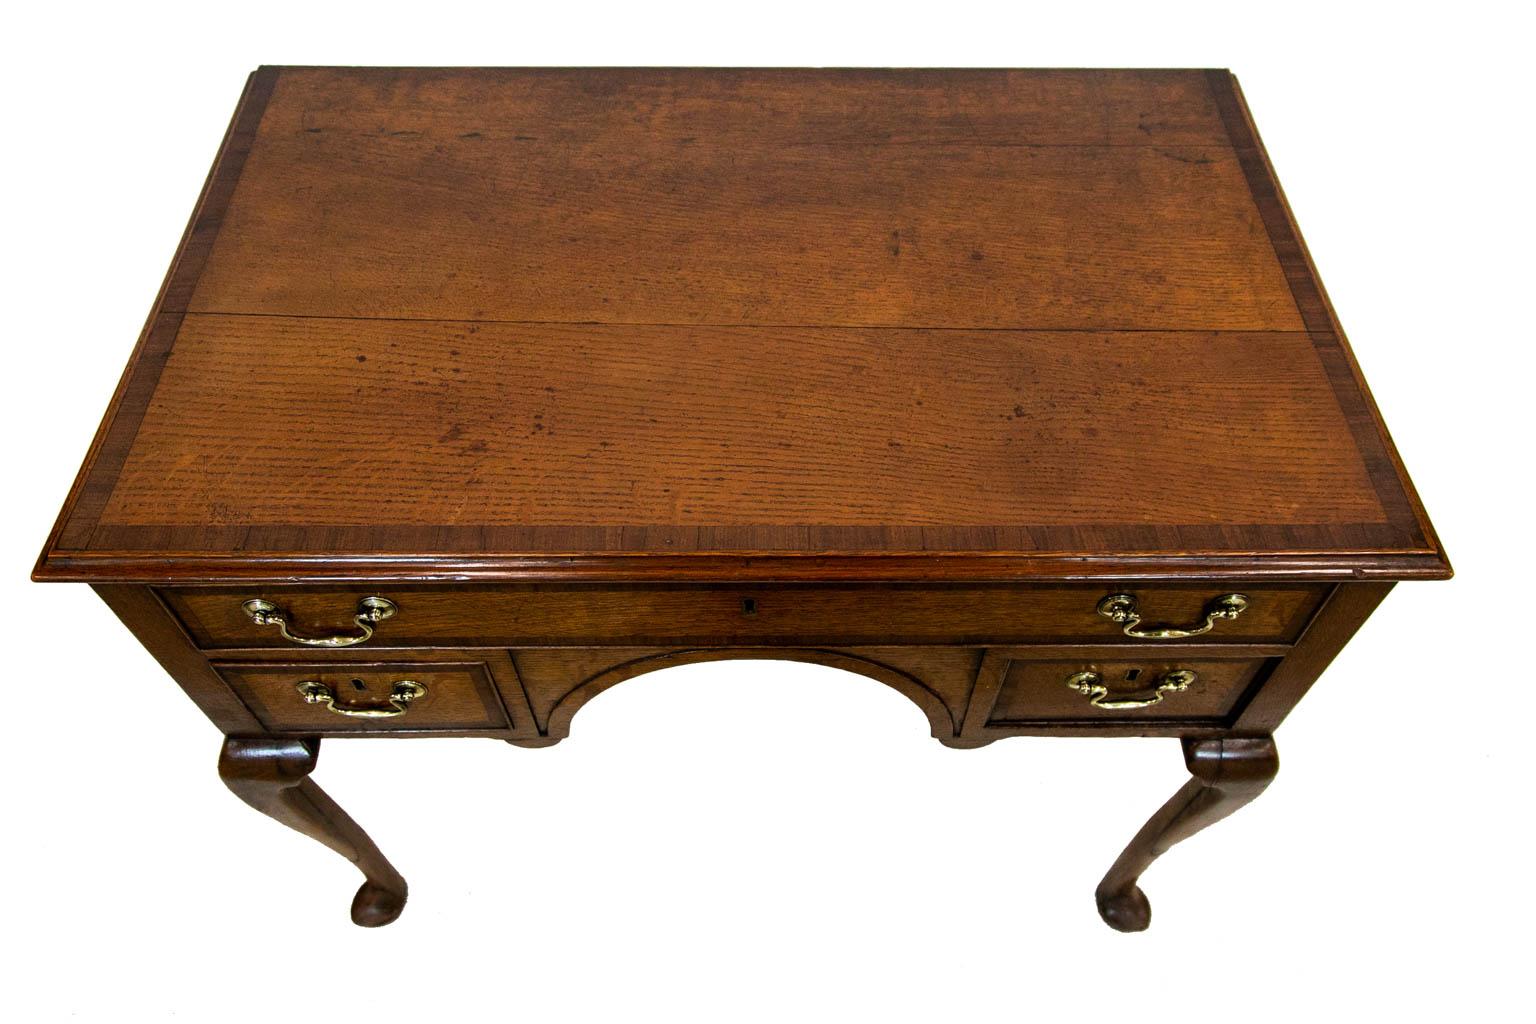 This oak and mahogany lowboy has a 1/16 inch shrinkage separation in the top. The top has an applied ogee molding and is crossbanded with 3/4 inch mahogany crossbanding. The drawer fronts have a 1/2 inch mahogany crossbanding with the original brass